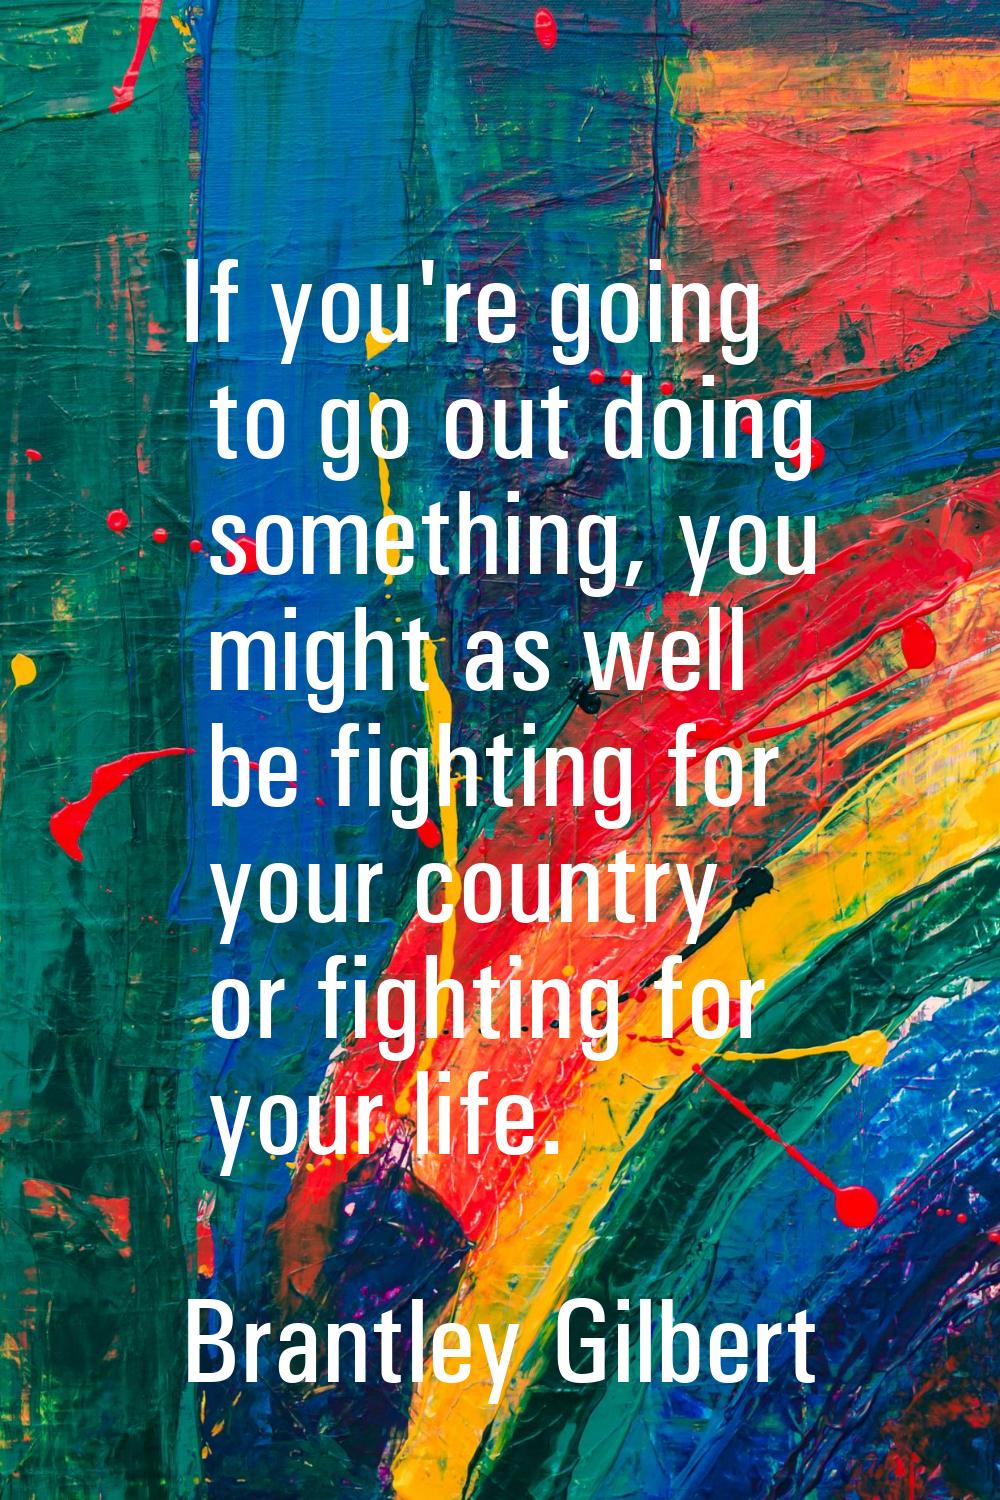 If you're going to go out doing something, you might as well be fighting for your country or fighti